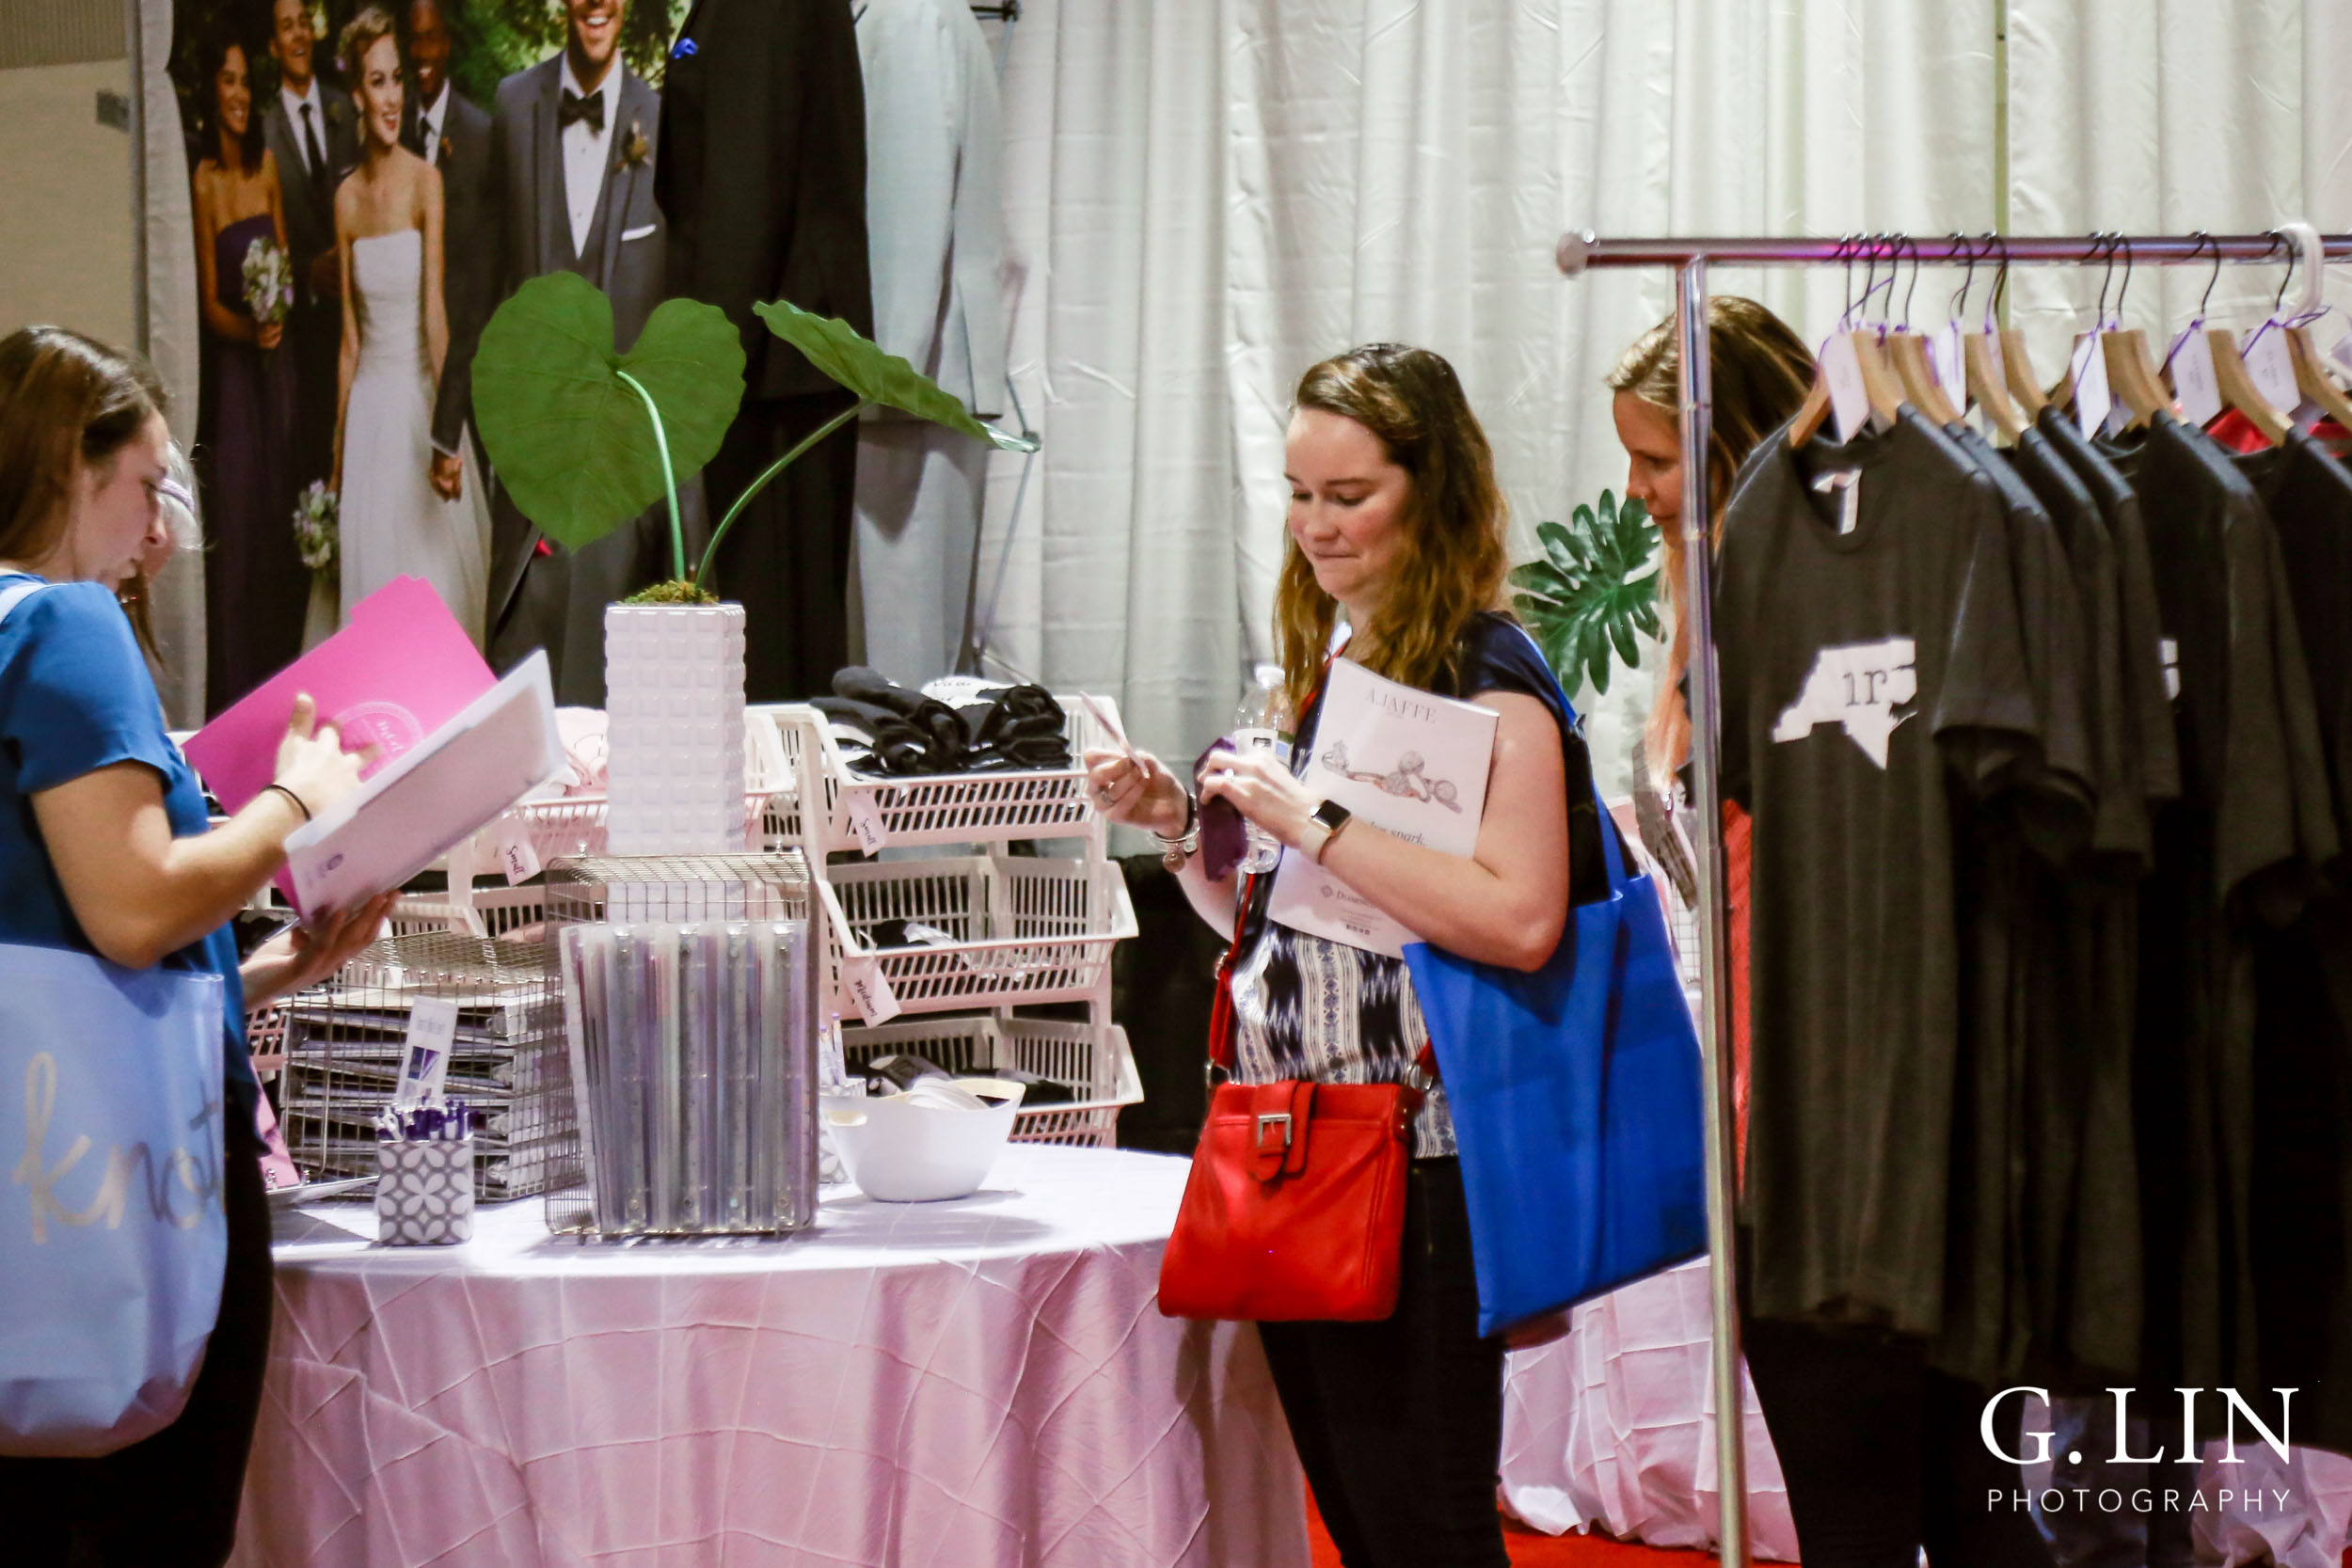 Raleigh Event Photographer | G. Lin Photography | Guests at booth looking at wedding merchandise